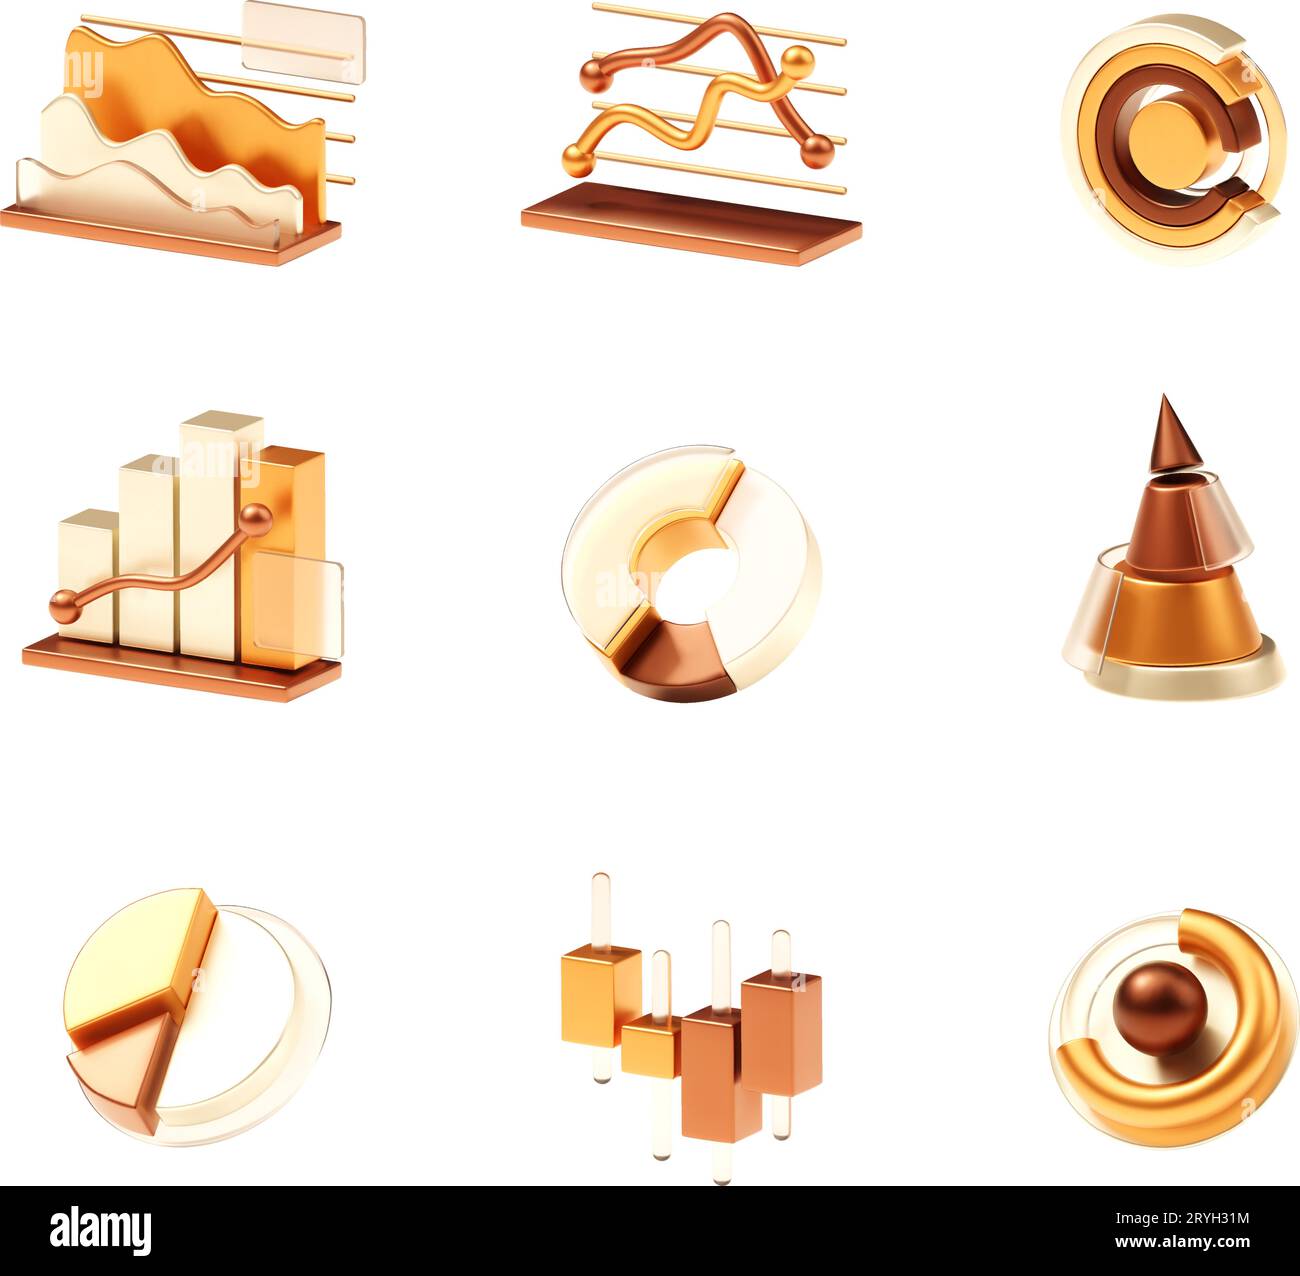 Vector charts and diagrams set. Different charts - Pie chart, column, bar, area, doughnut, stacked bar, pyramid, line. Statistics Infographic elements Stock Vector